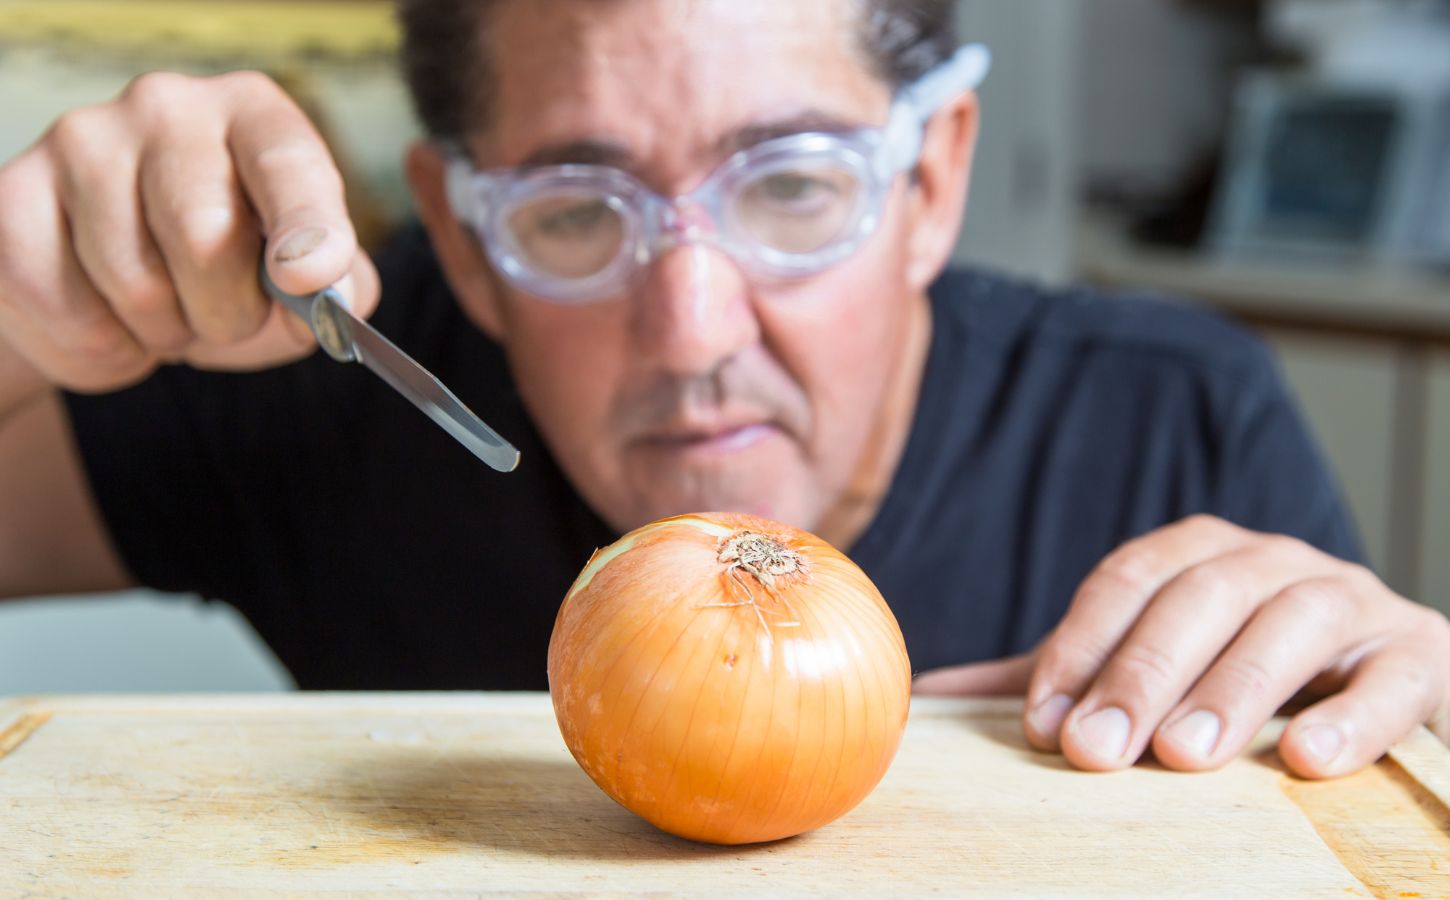 Photo shows a man in swmming goggles about to cut into a white onion with a scalpel